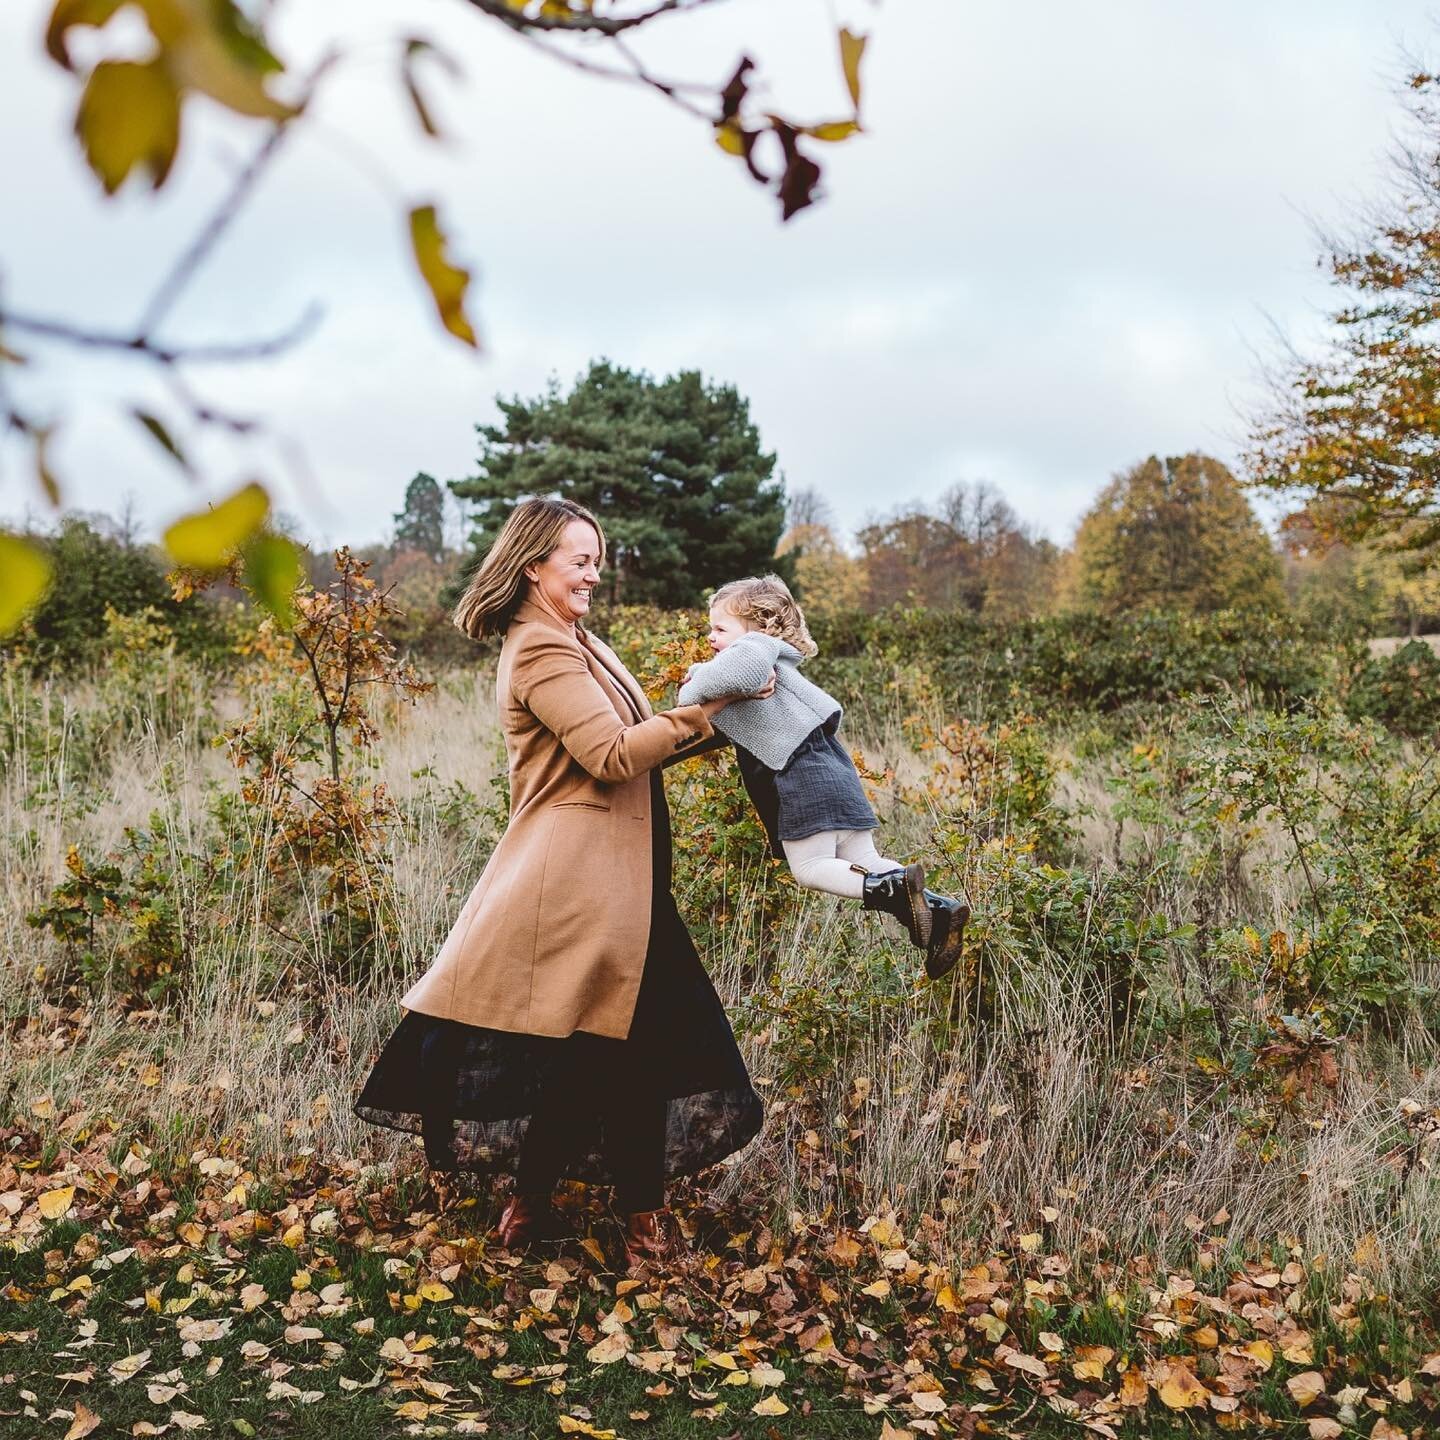 The Lloyd Family💗 @belinda_lloyd2021 

I&rsquo;ve been so so excited to share more of this gorgeous shoot with you all! (&hellip;..but I was waiting until Christmas present prints had been given out first!)

I love taking photos of families outside&